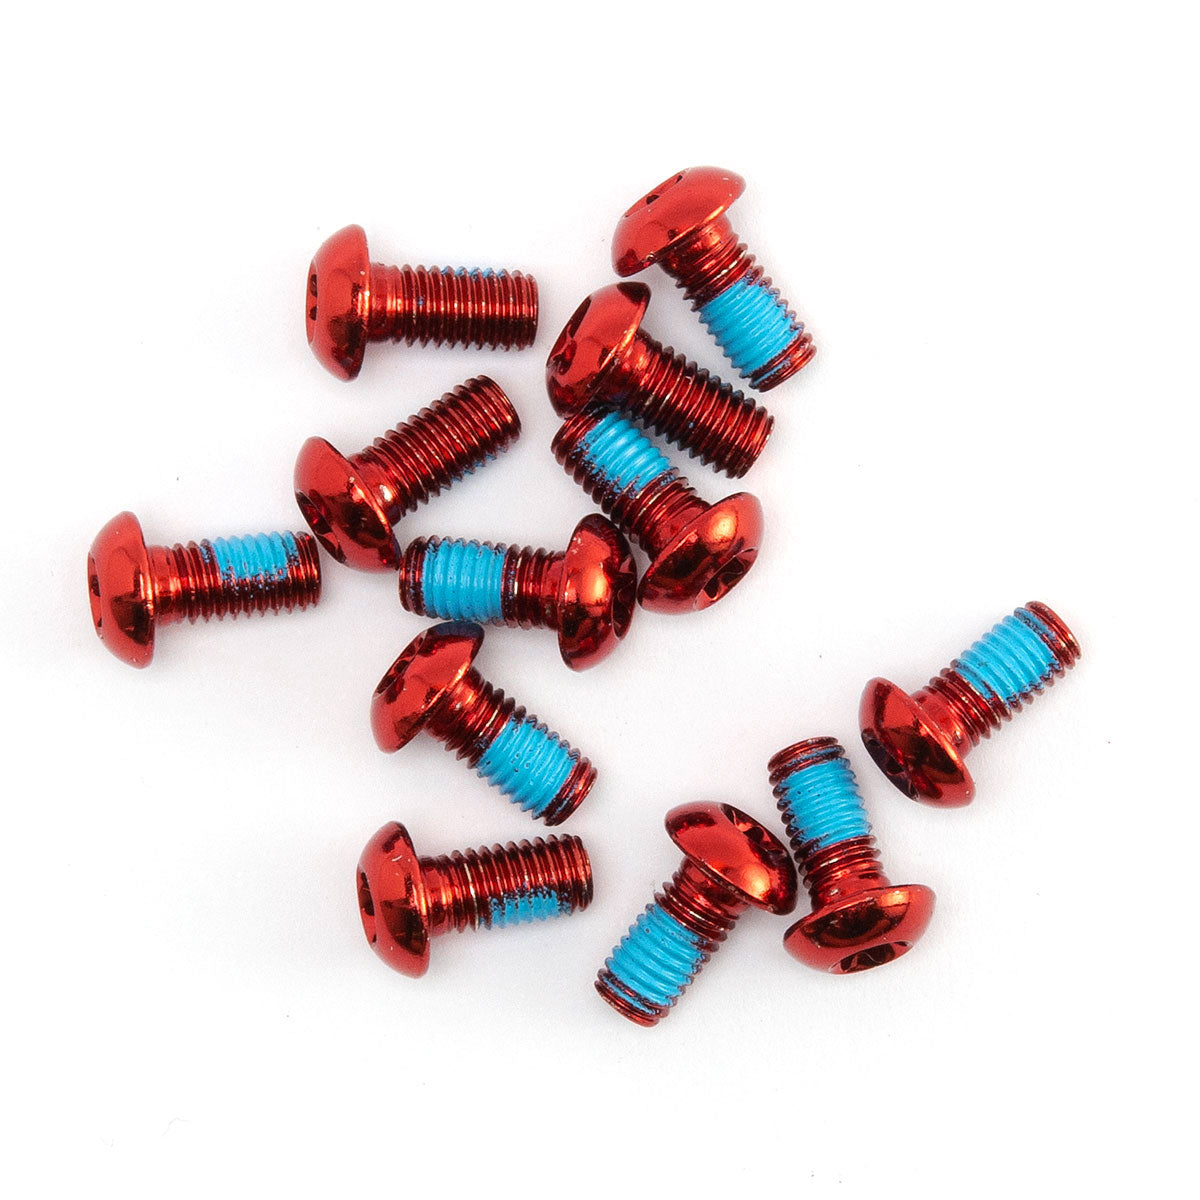 Cleanskin T25 Rotor Bolts - Pack Of 12 - Red